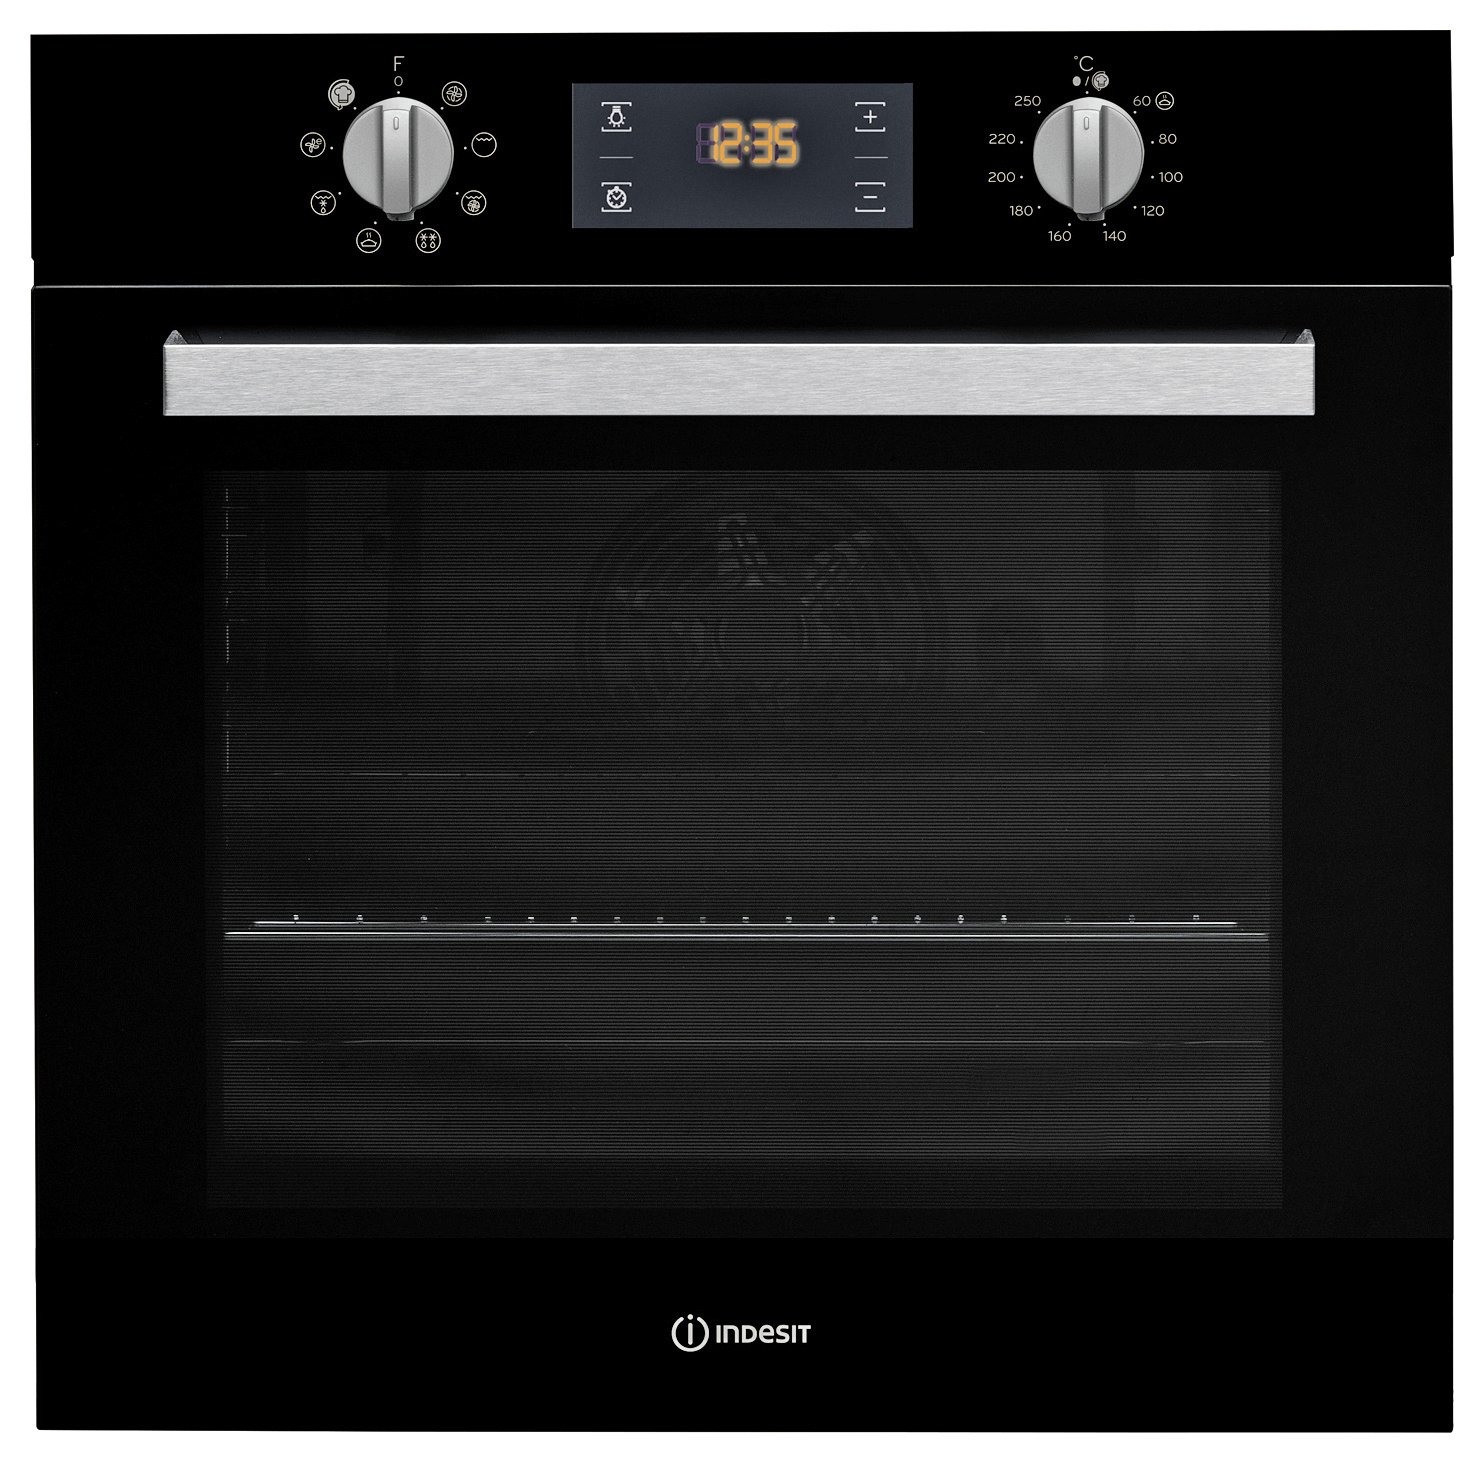 Indesit Aria IFW6340BL Built In Single Electric Oven Review